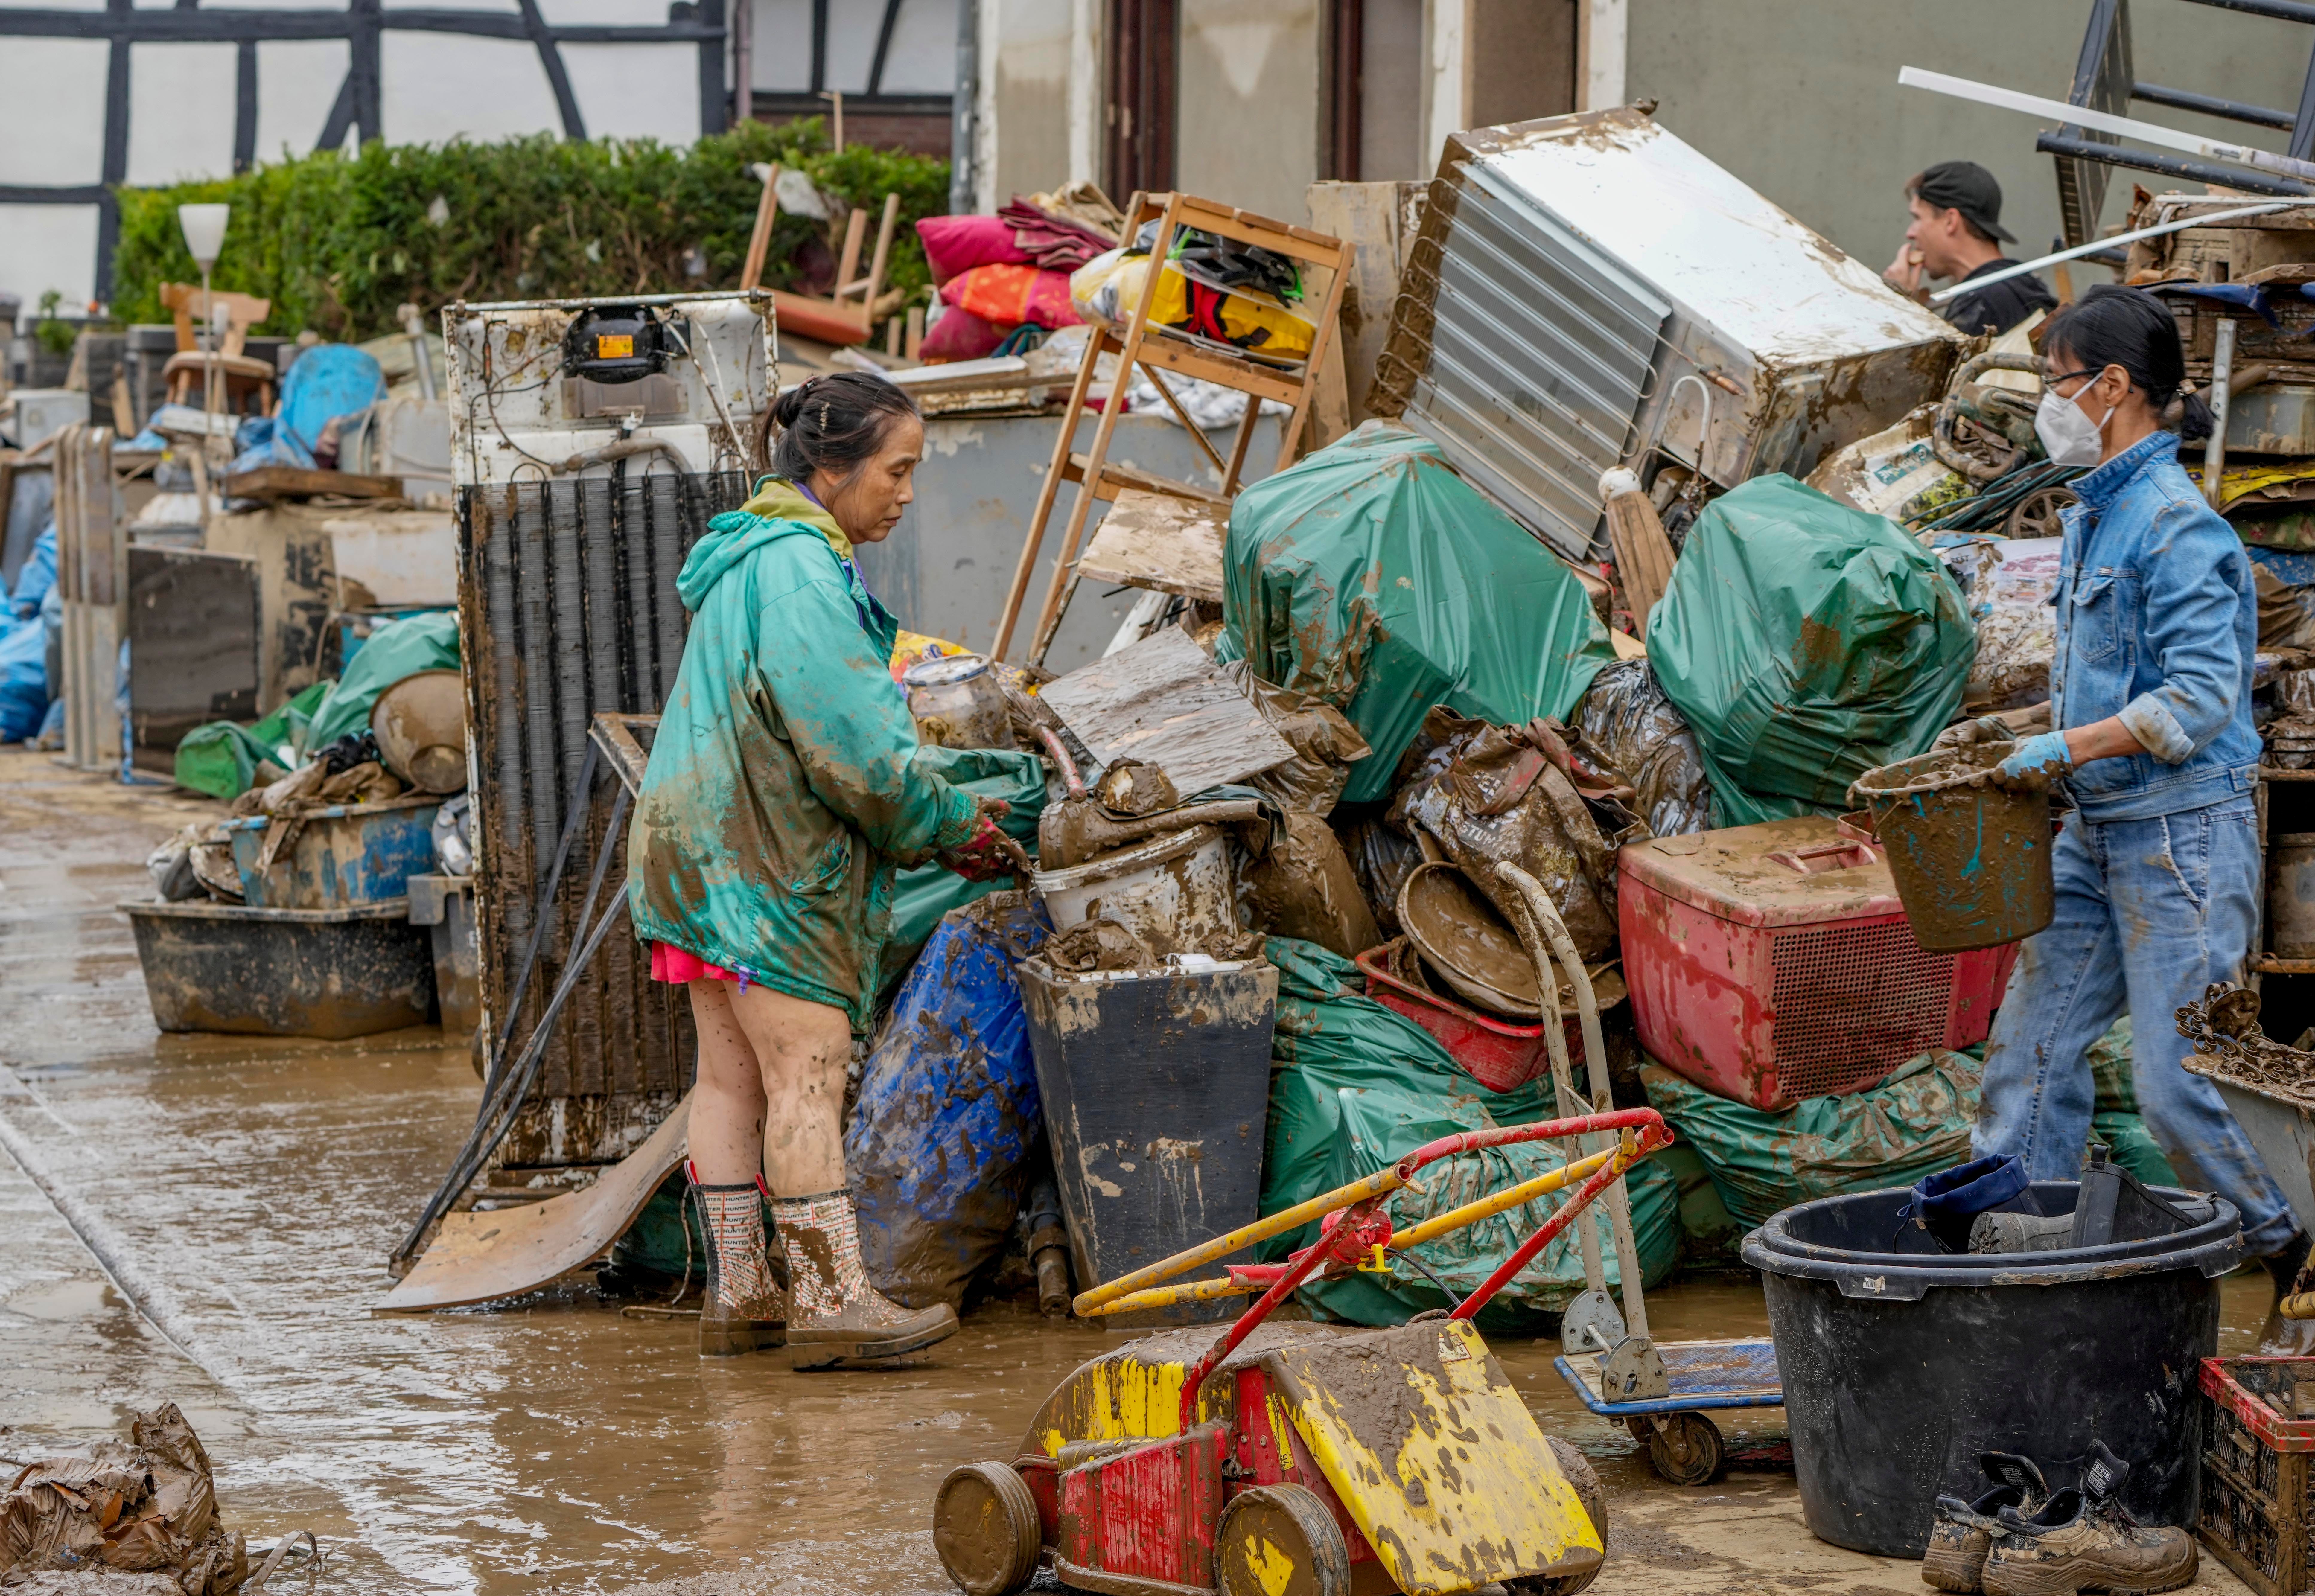 Many were forced to throw out not just rubbish, but also their possessions as a result of the floods